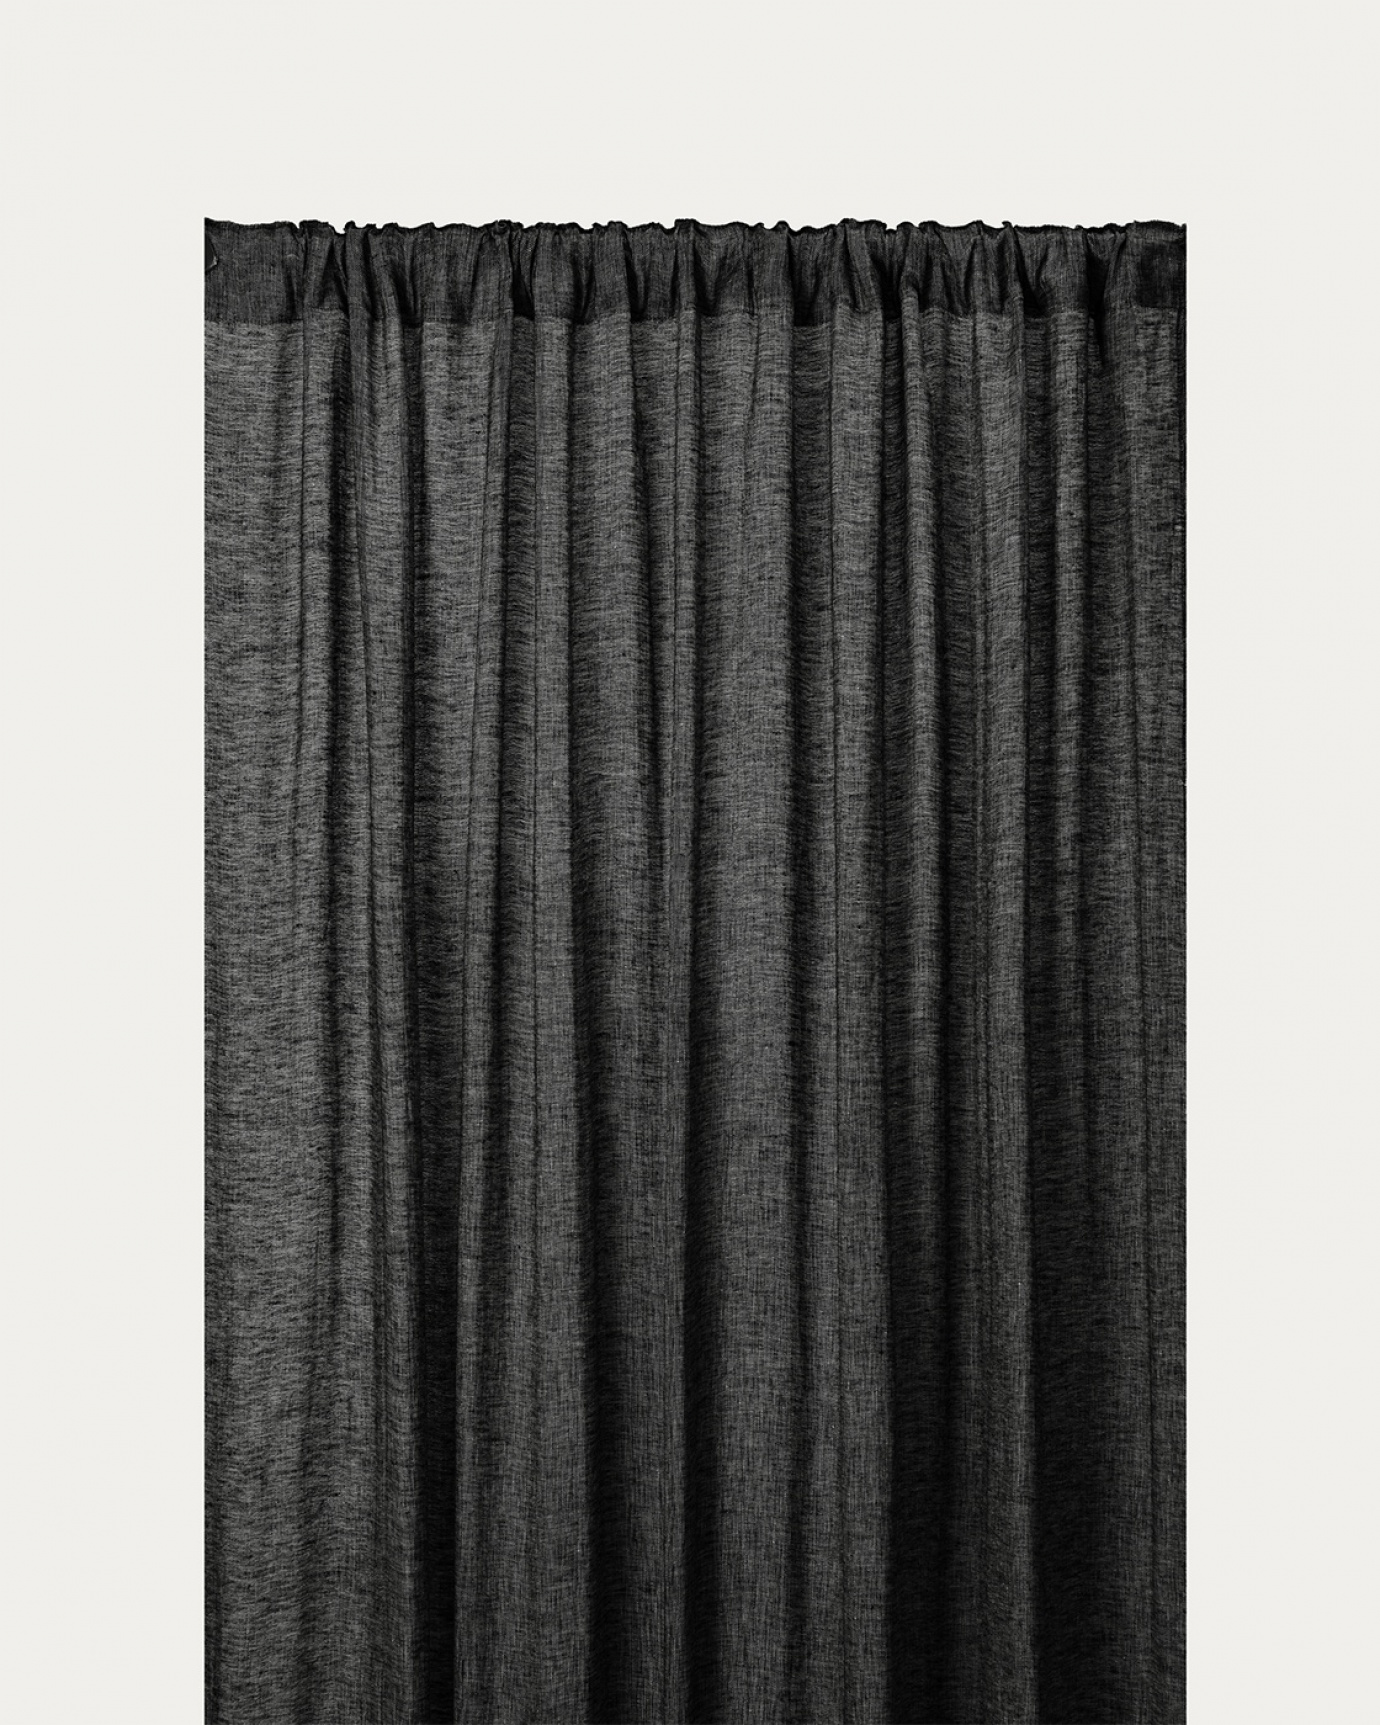 Product image black INTERMEZZO curtain of sheer linen with finished pleat tape from LINUM DESIGN. Size 140x290 cm and sold in 2-pack.